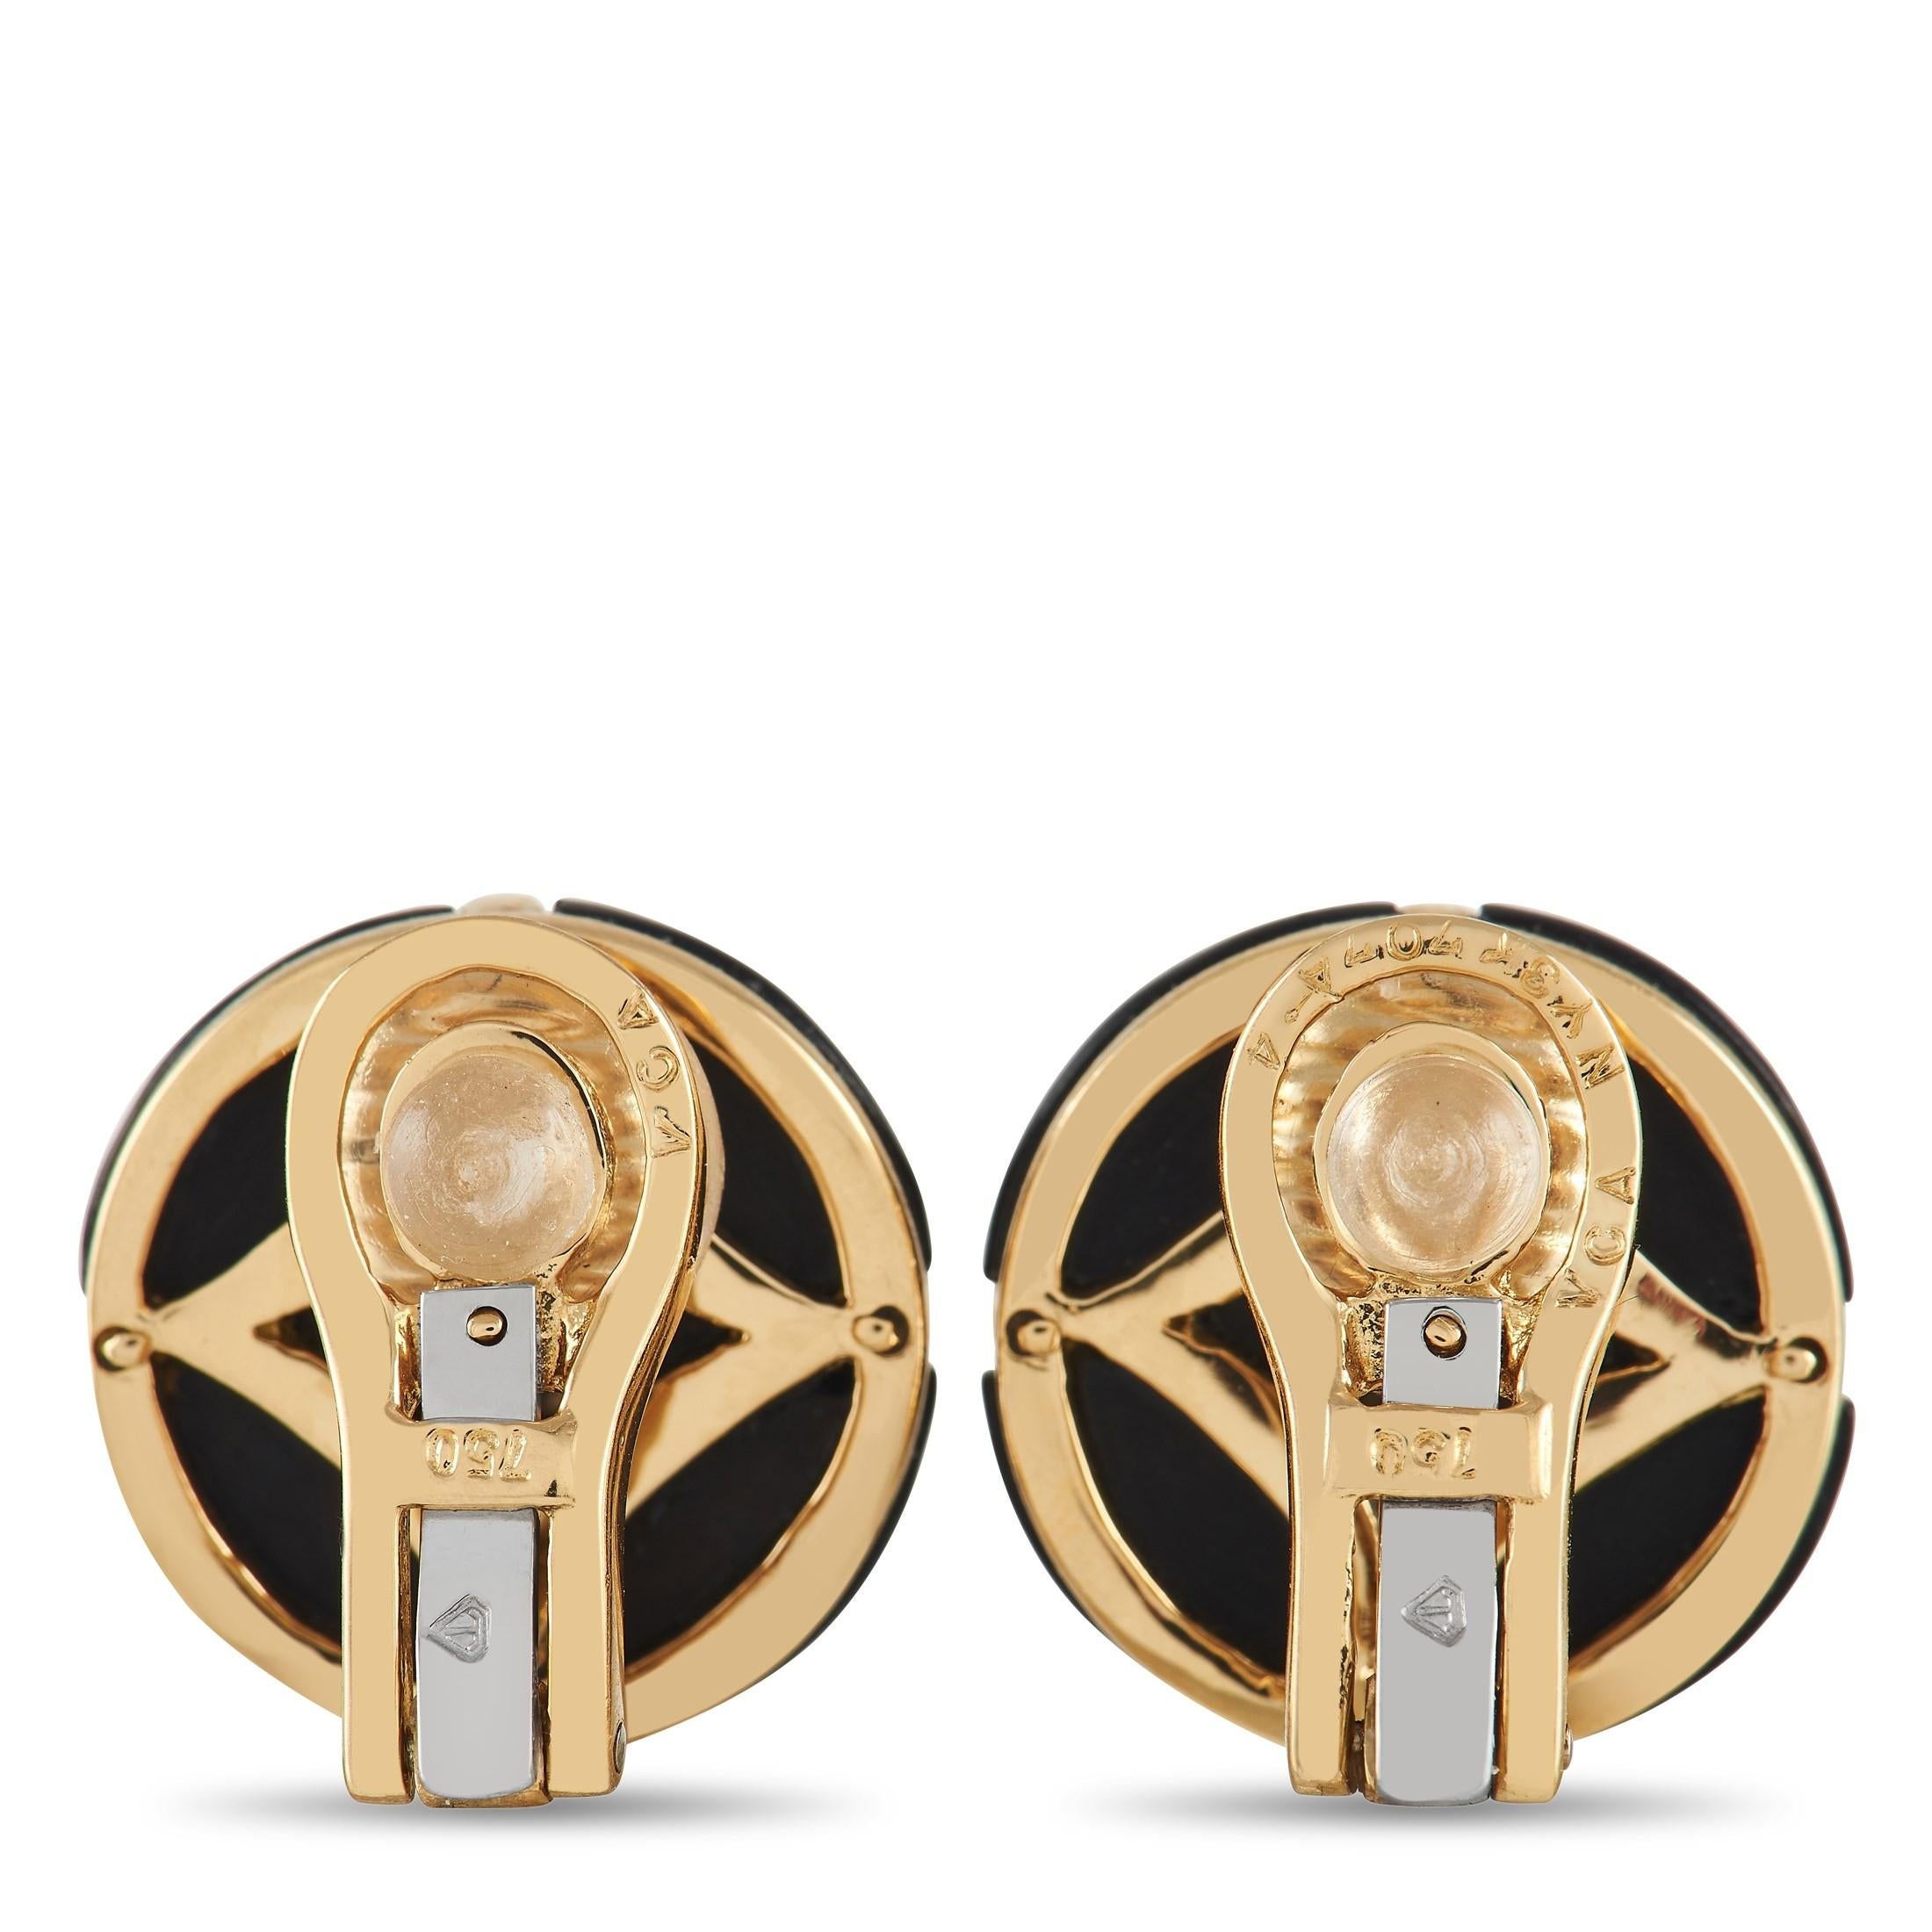 A daring choice, this pair of onyx and diamond clip-on earrings from Van Cleef & Arpels is sure to add an edgy tone to your looks. It features a rounded black onyx stone cut into quarters by a yellow gold frame with a four-diamond centerpiece. The